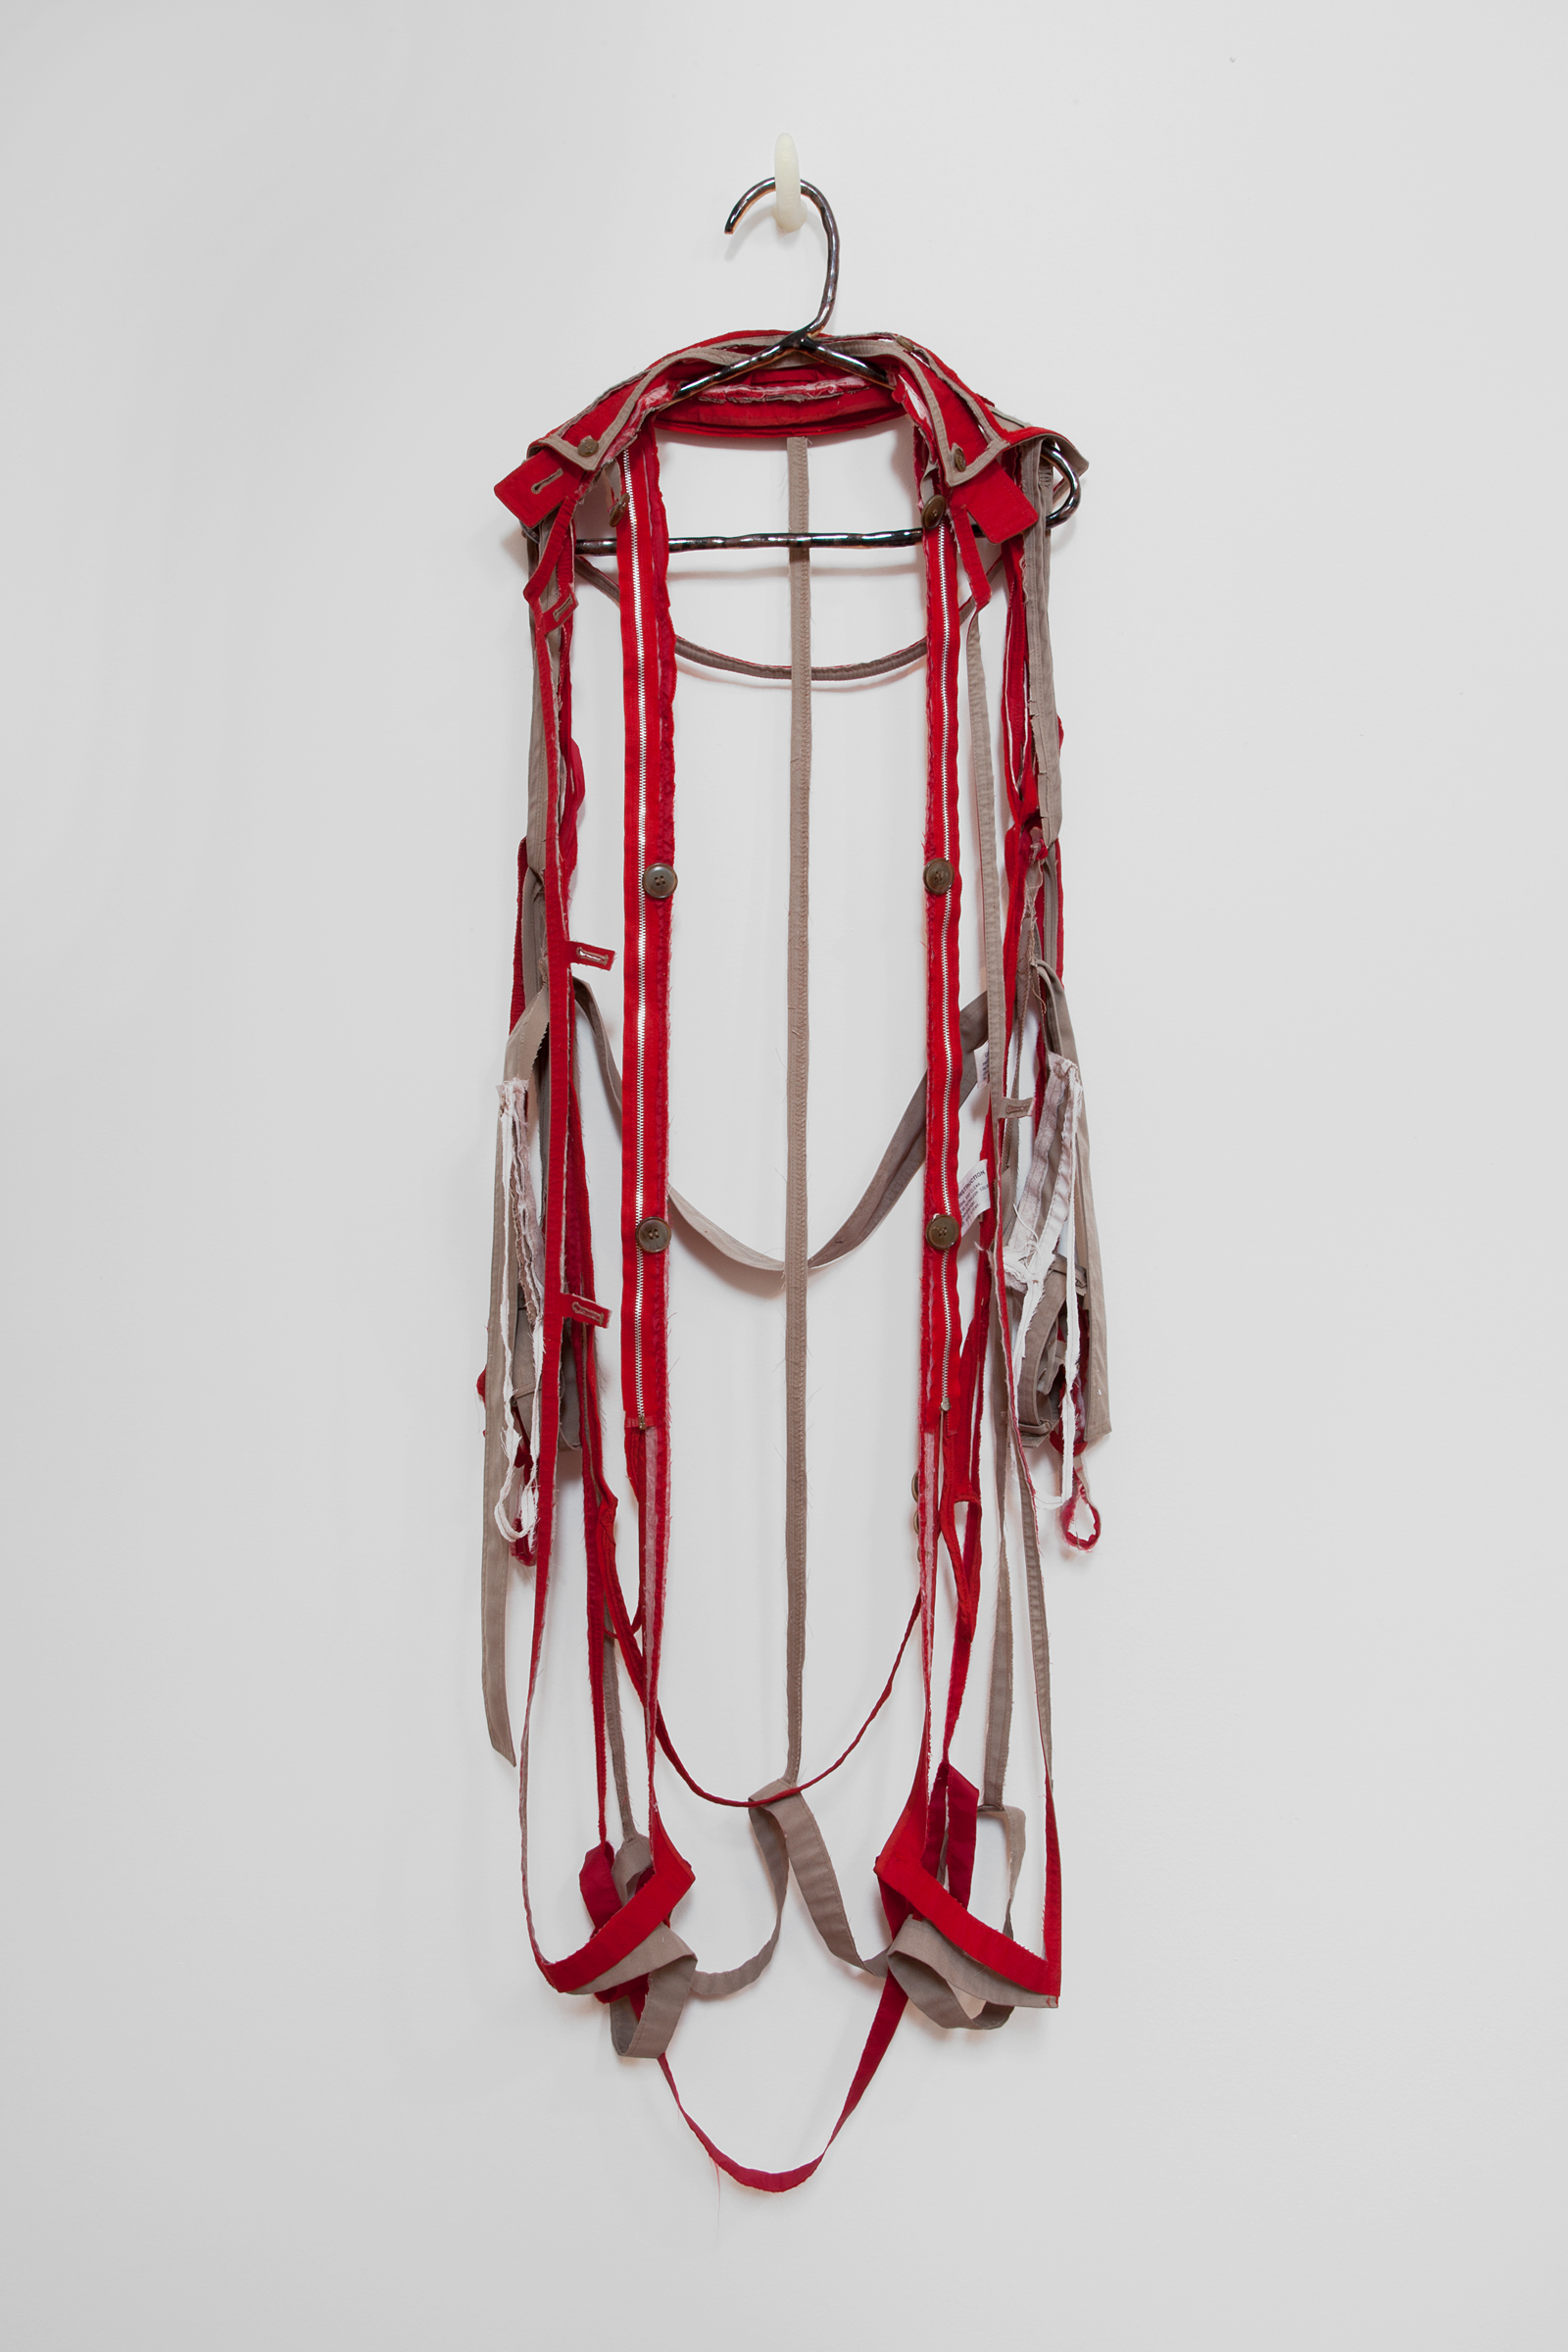   ANNA SEW HOY   rouge/tan , fired stoneware, trench coat and resin finger hook, 58" x 17" x 5", 2012 